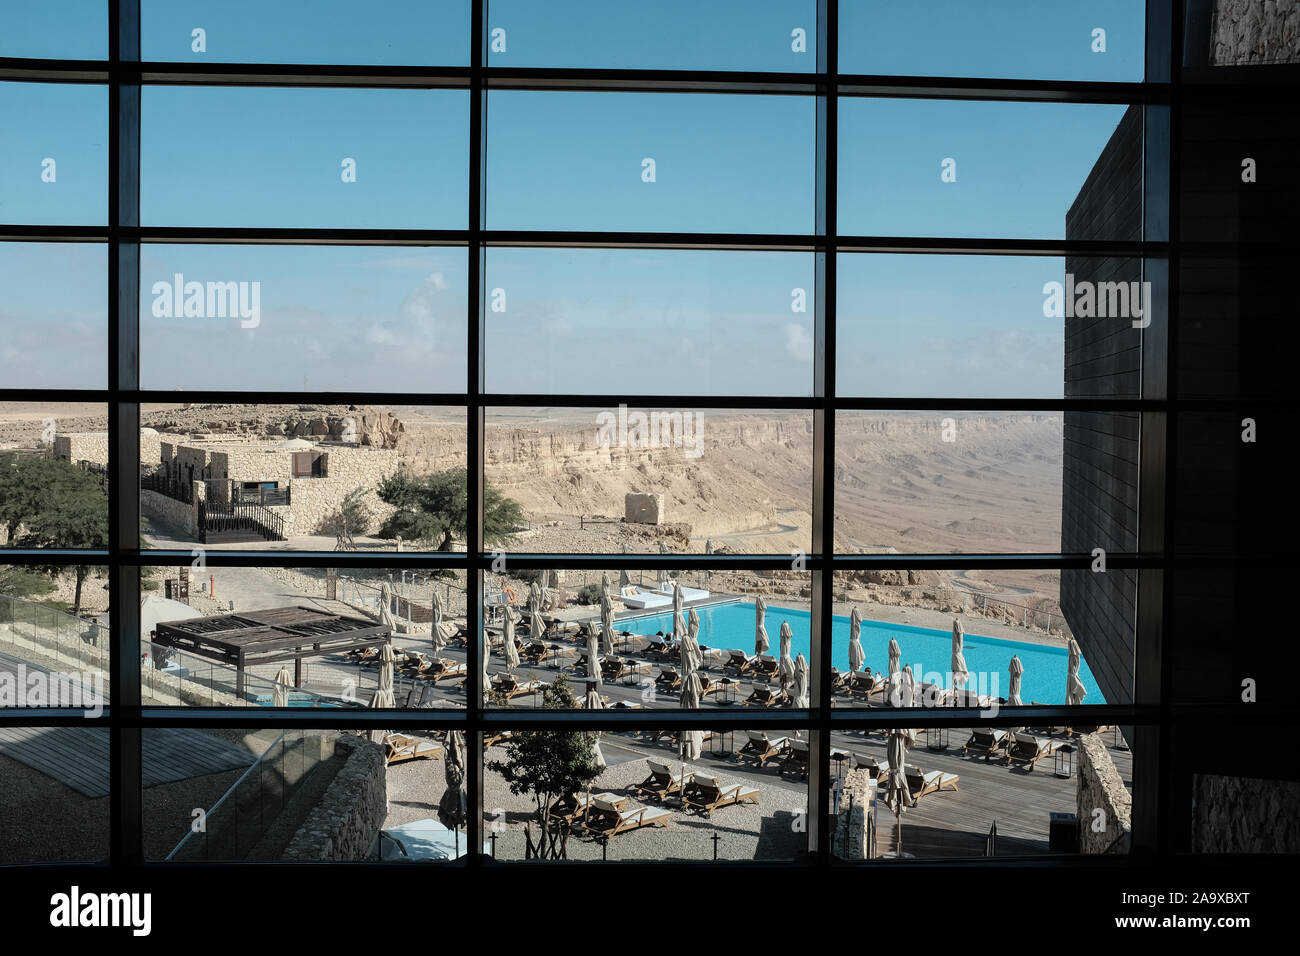 Mitspe Ramon, Israel. 16th November, 2019. A view of the Beresheet Hotel in Israel southern town of Mitspe Ramon in the midst of the Negev Desert. Credit: Nir Alon/Alamy Live News. Stock Photo